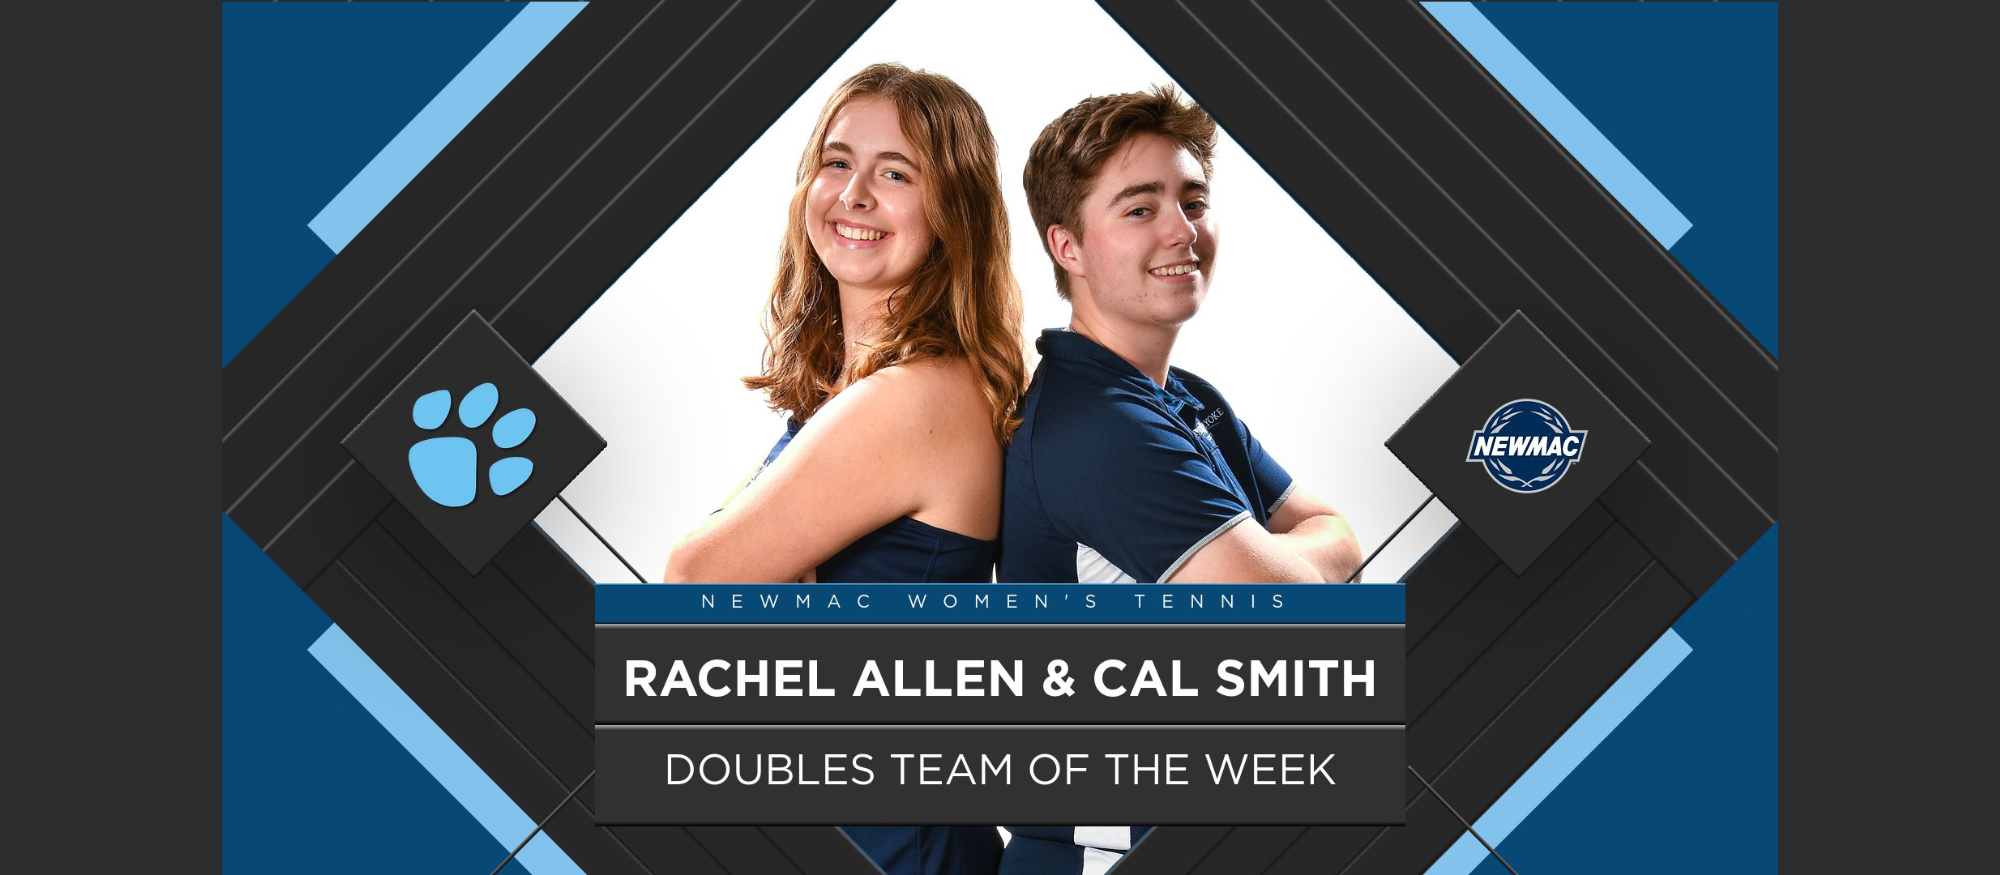 Cal Smith and Rachel Allen receive NEWMAC Doubles Team of the Week honors